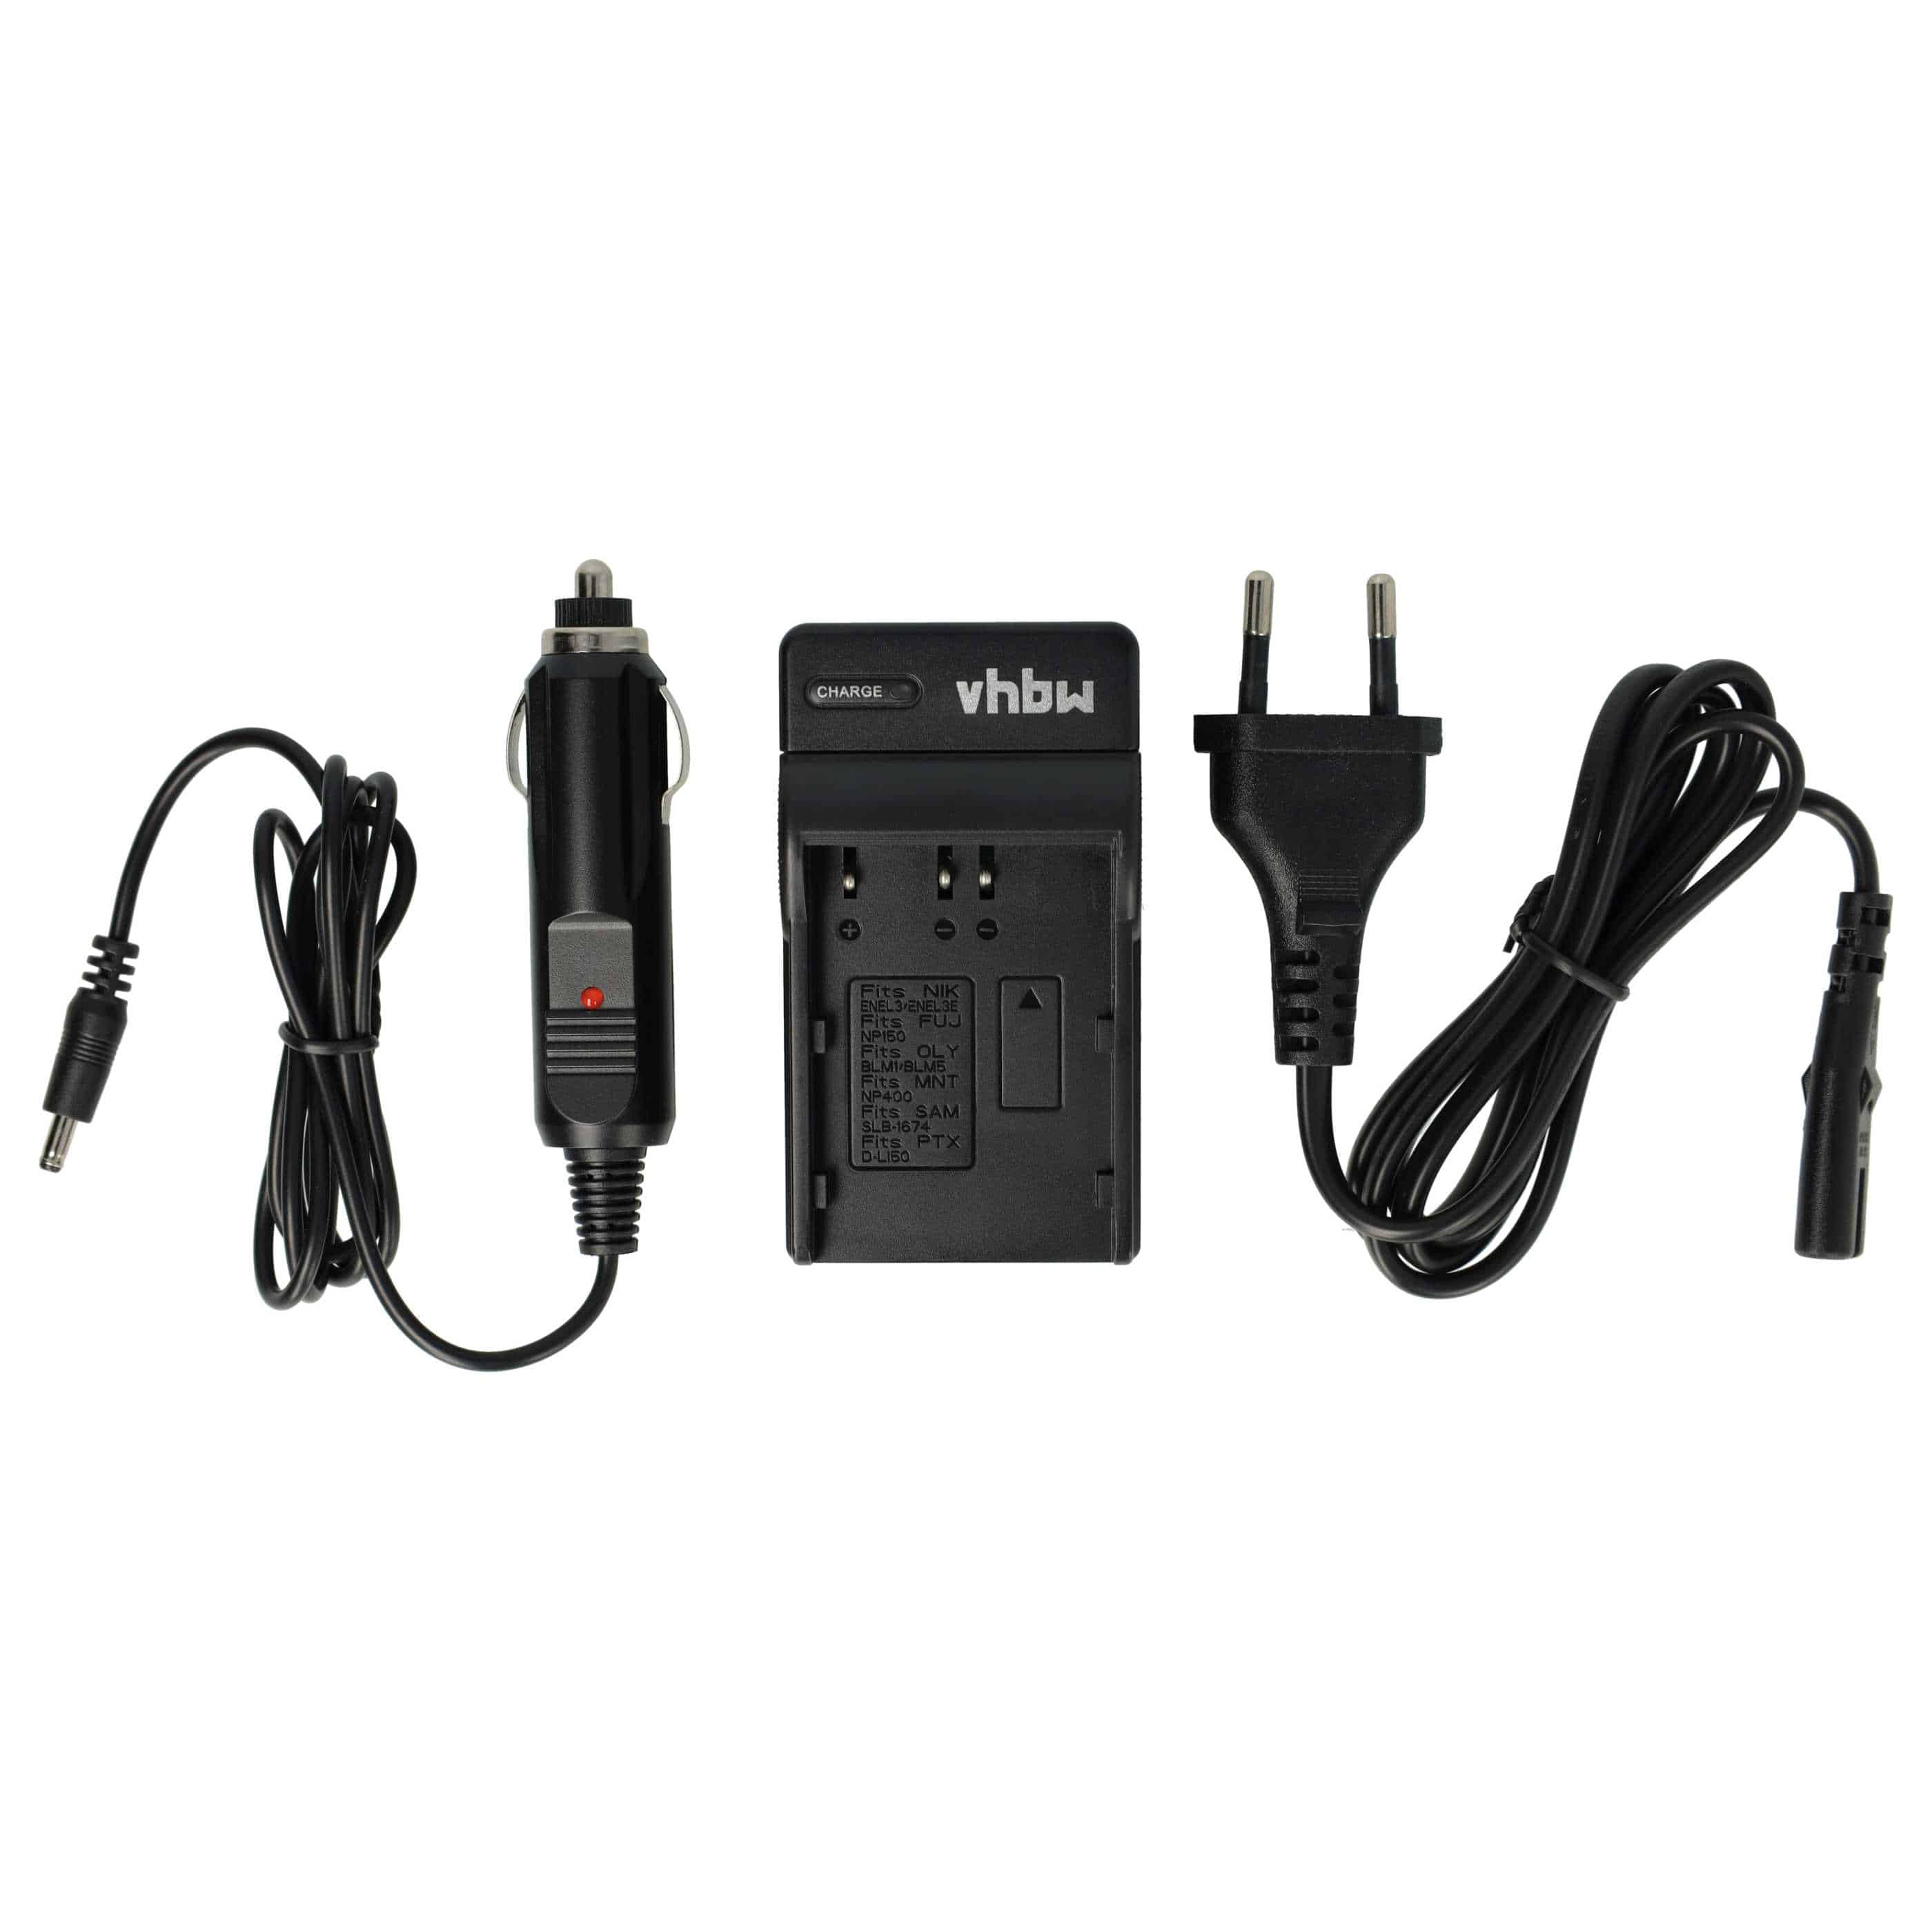 Battery Charger suitable for D50 Camera etc. - 0.6 A, 8.4 V